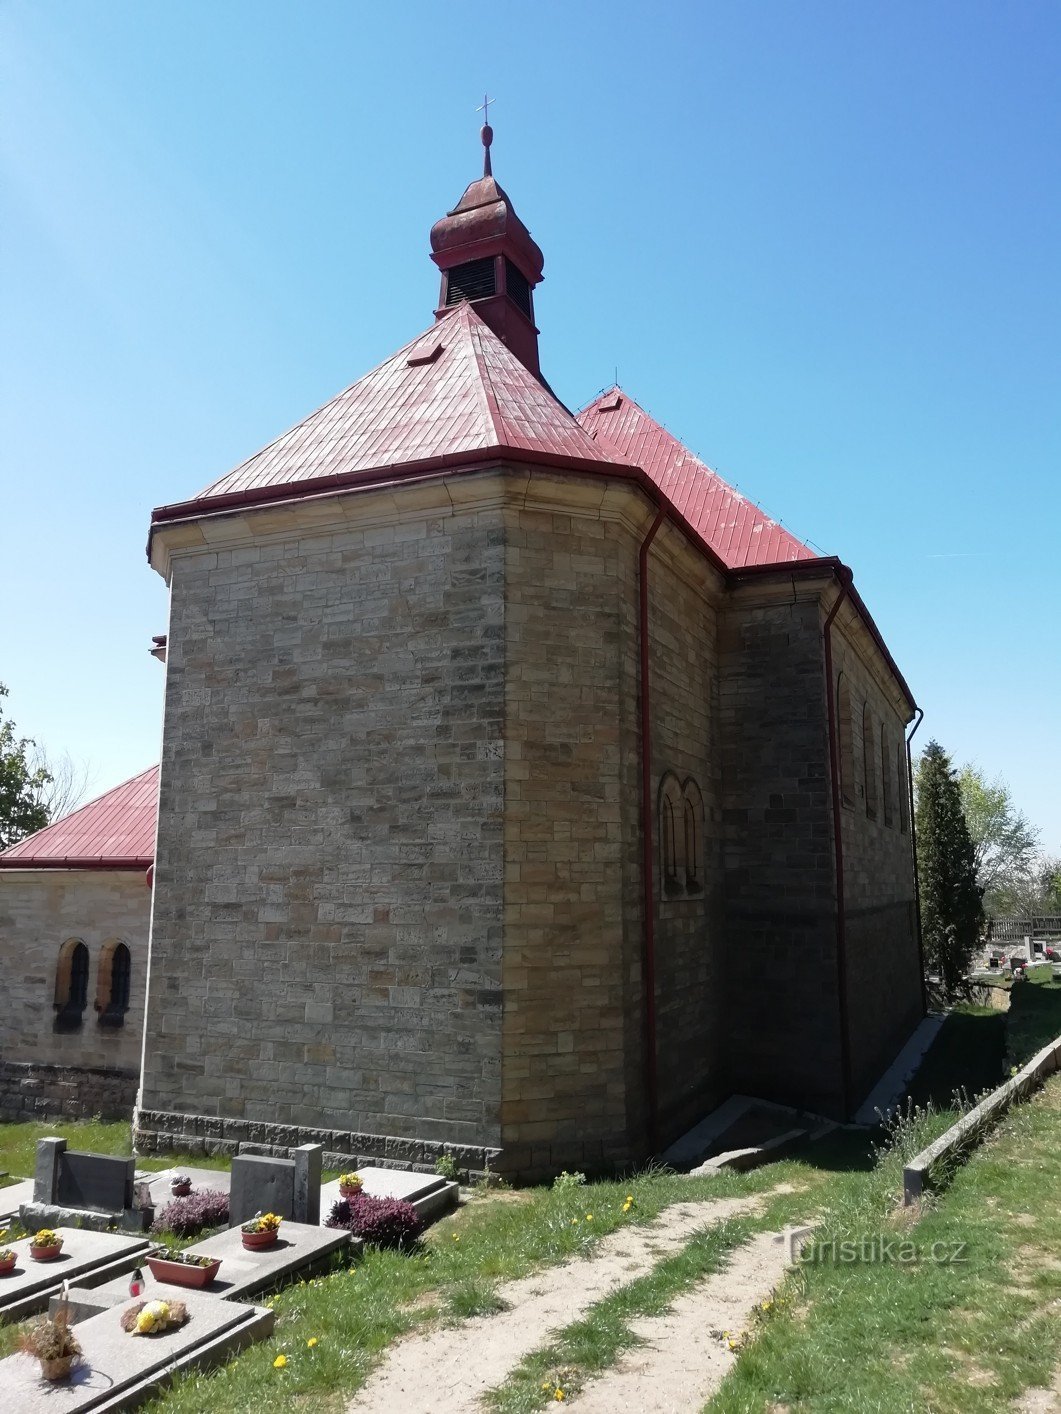 The Church of the Assumption of the Virgin Mary with the bell tower in the village of Vyskeř